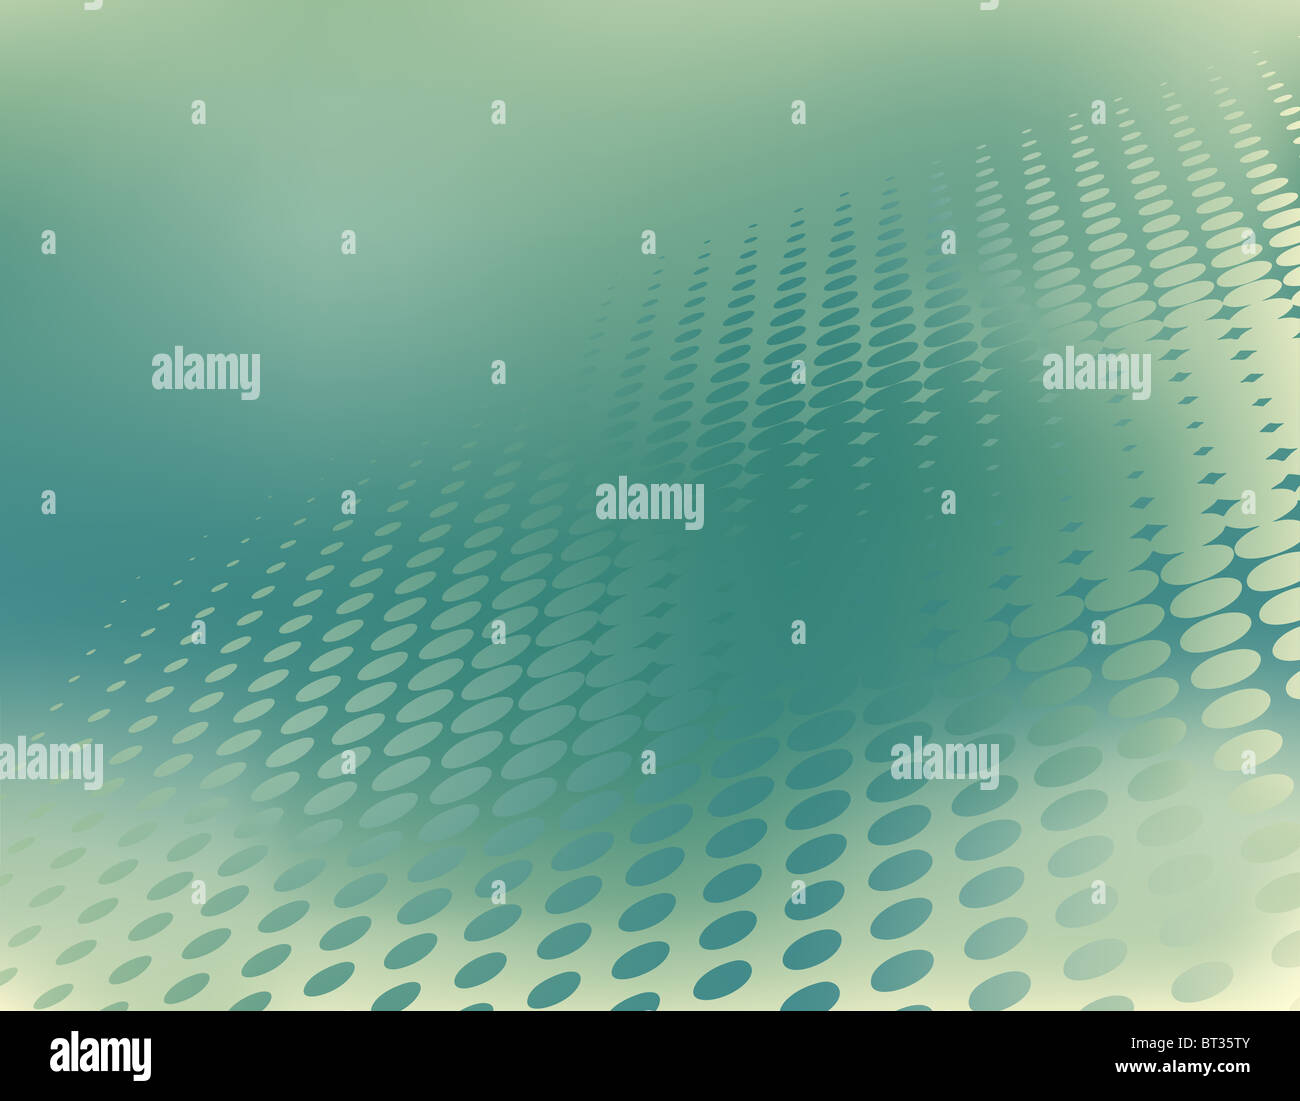 Abstract illustration of a green halftone pattern Stock Photo